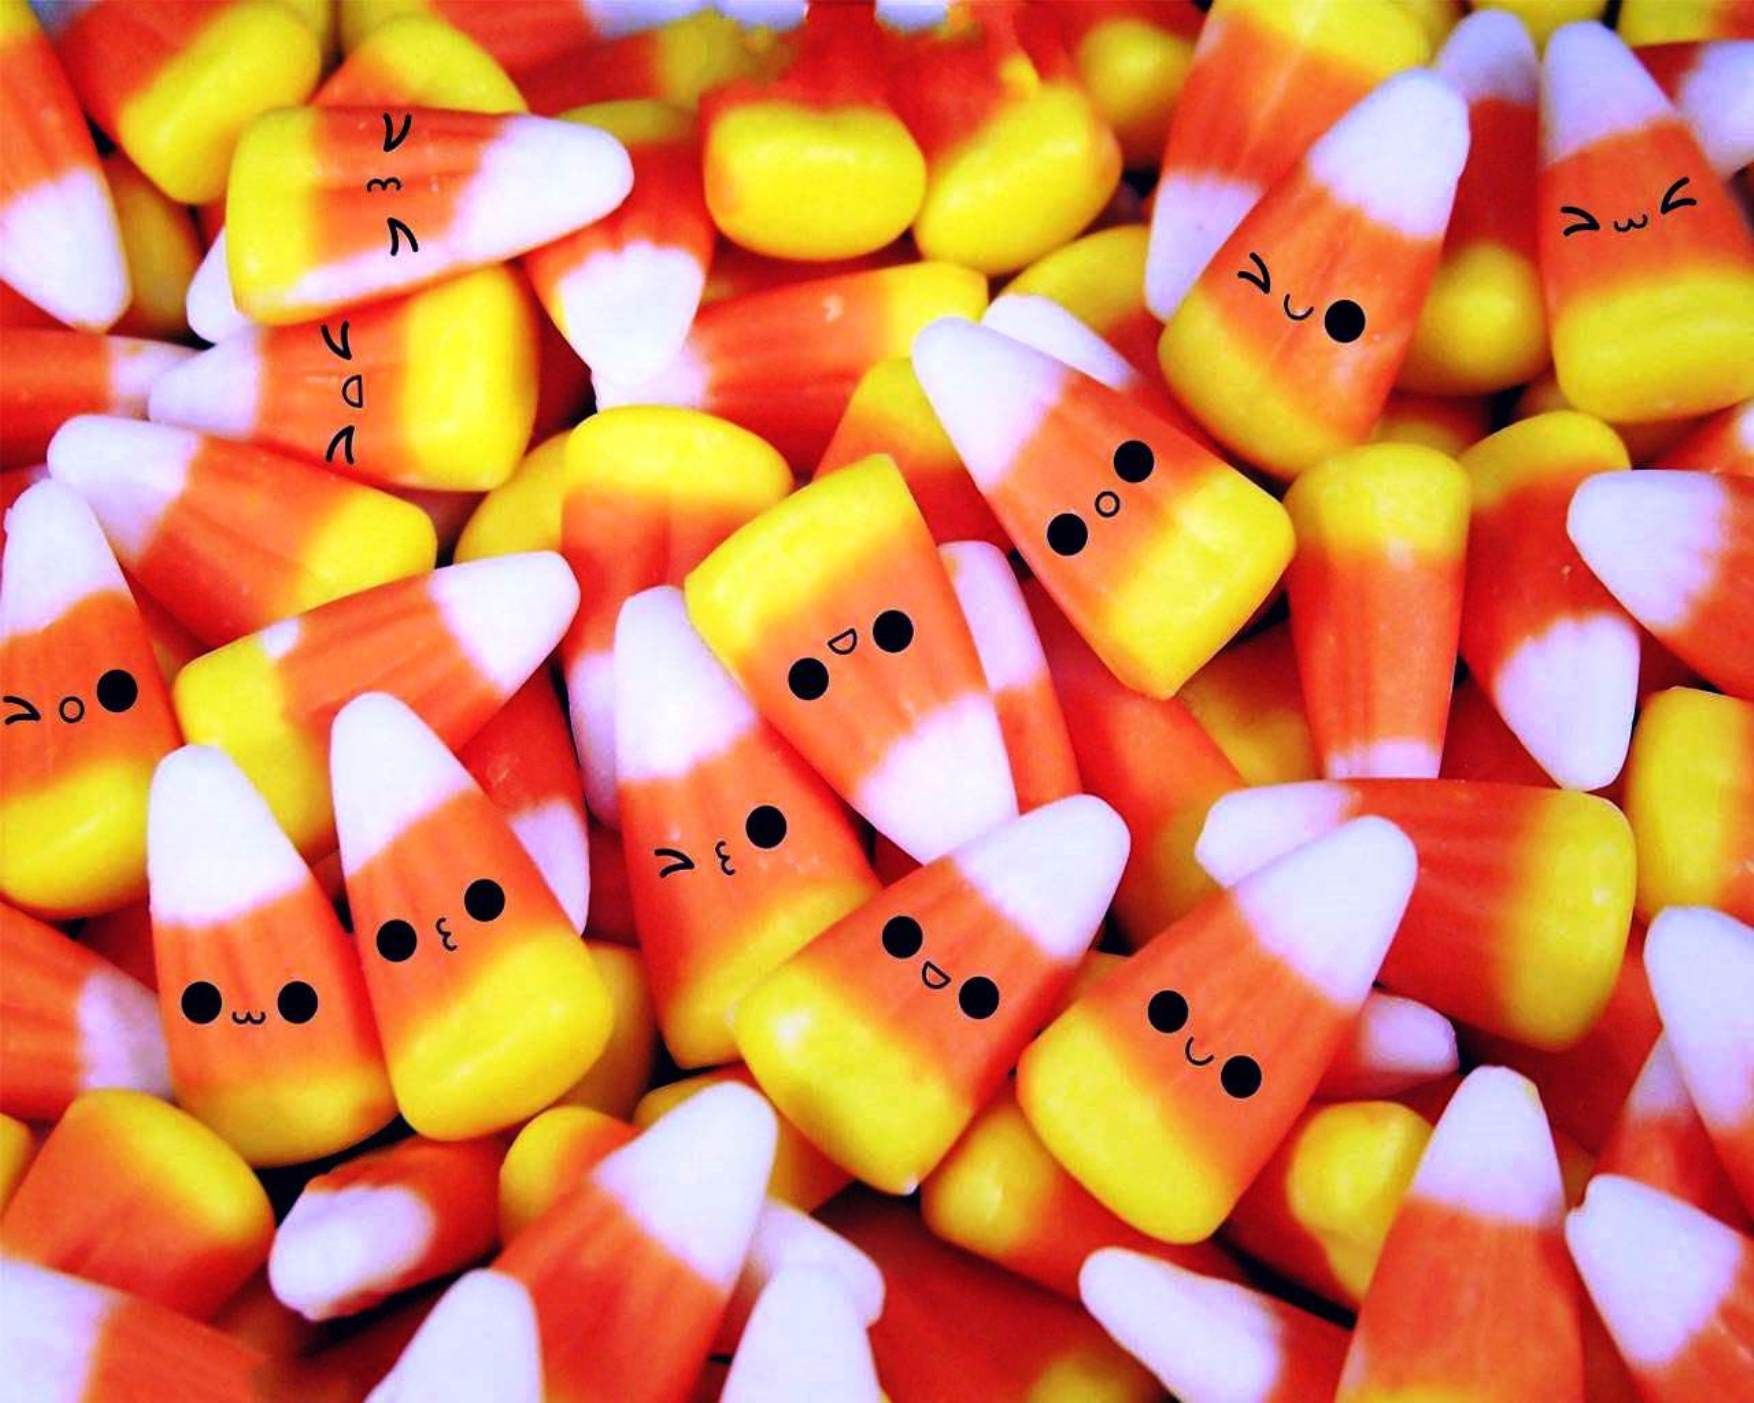 food wallpaper tumblr,candy,confectionery,candy corn,food